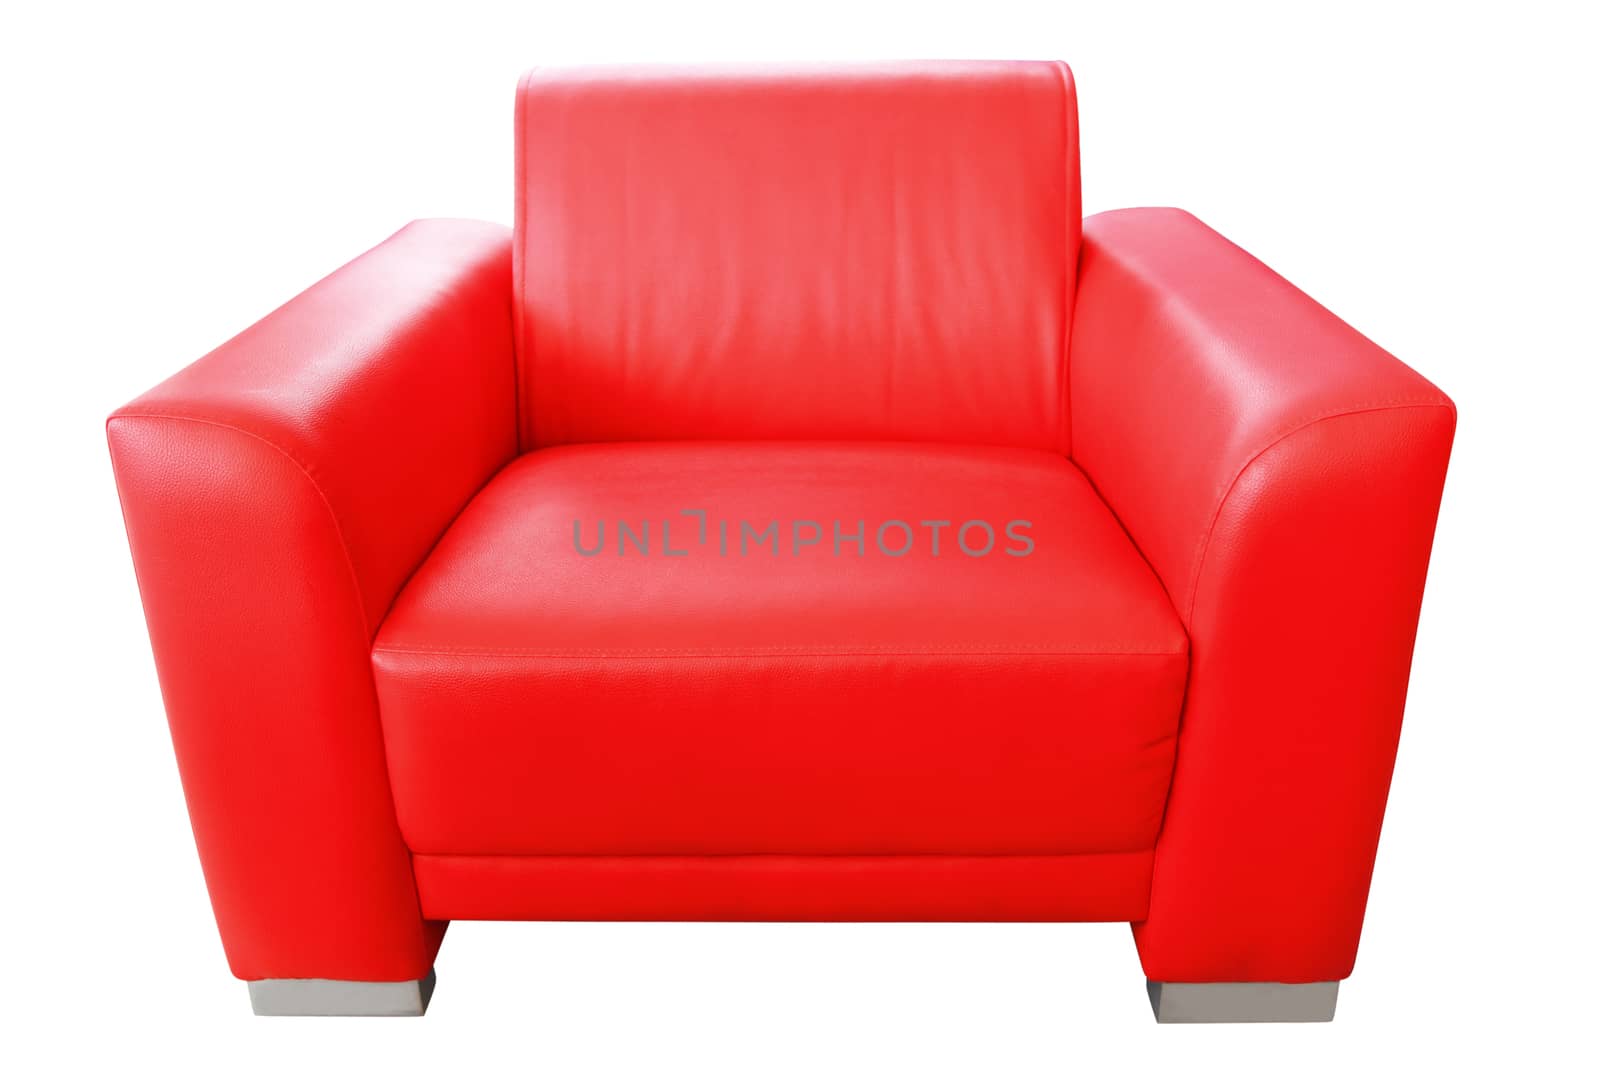 vintage red sofa isolated in white background